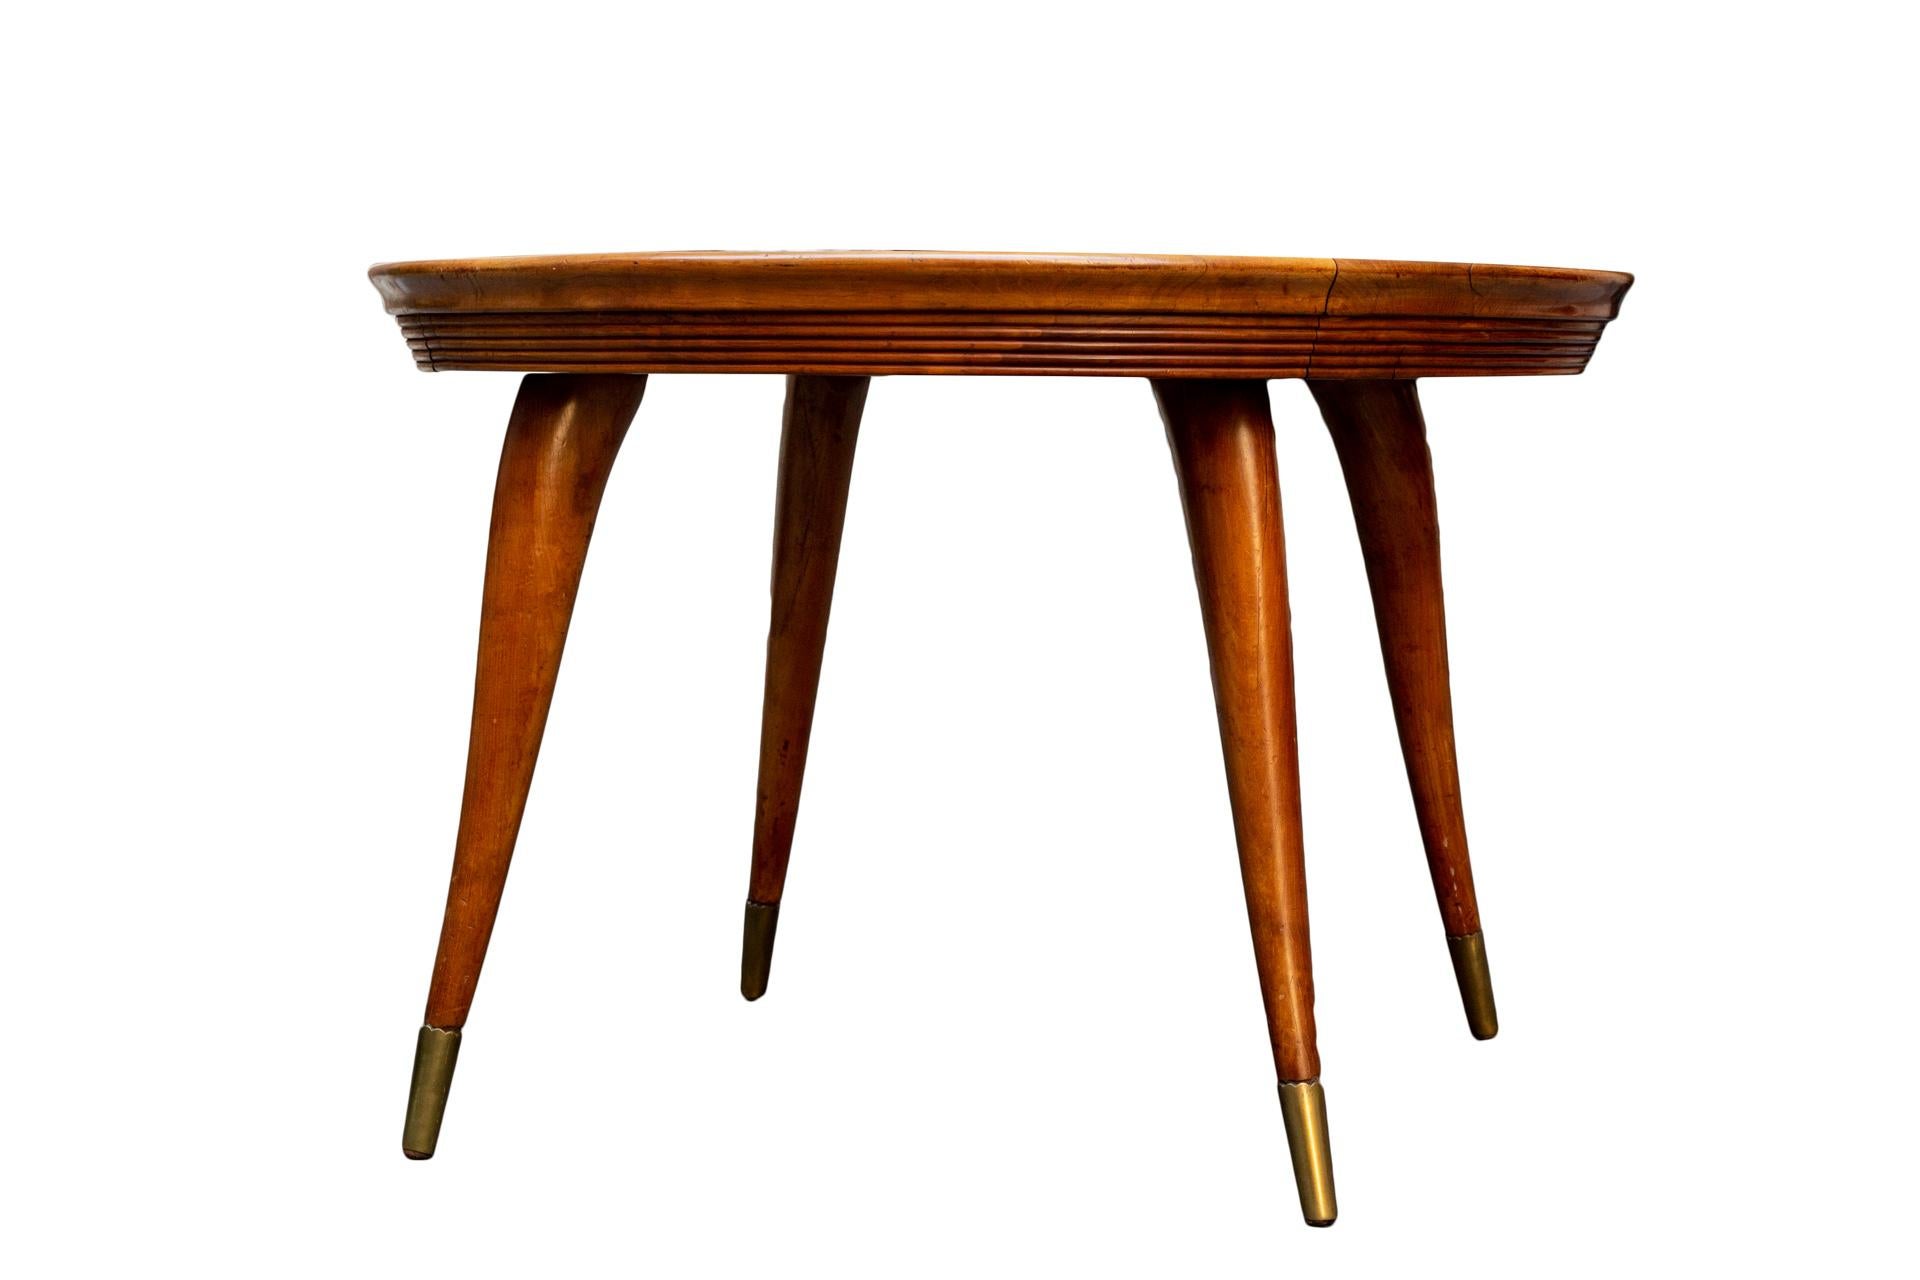  Table Mid century Modern . Wood and Brass Round Italian Table  1